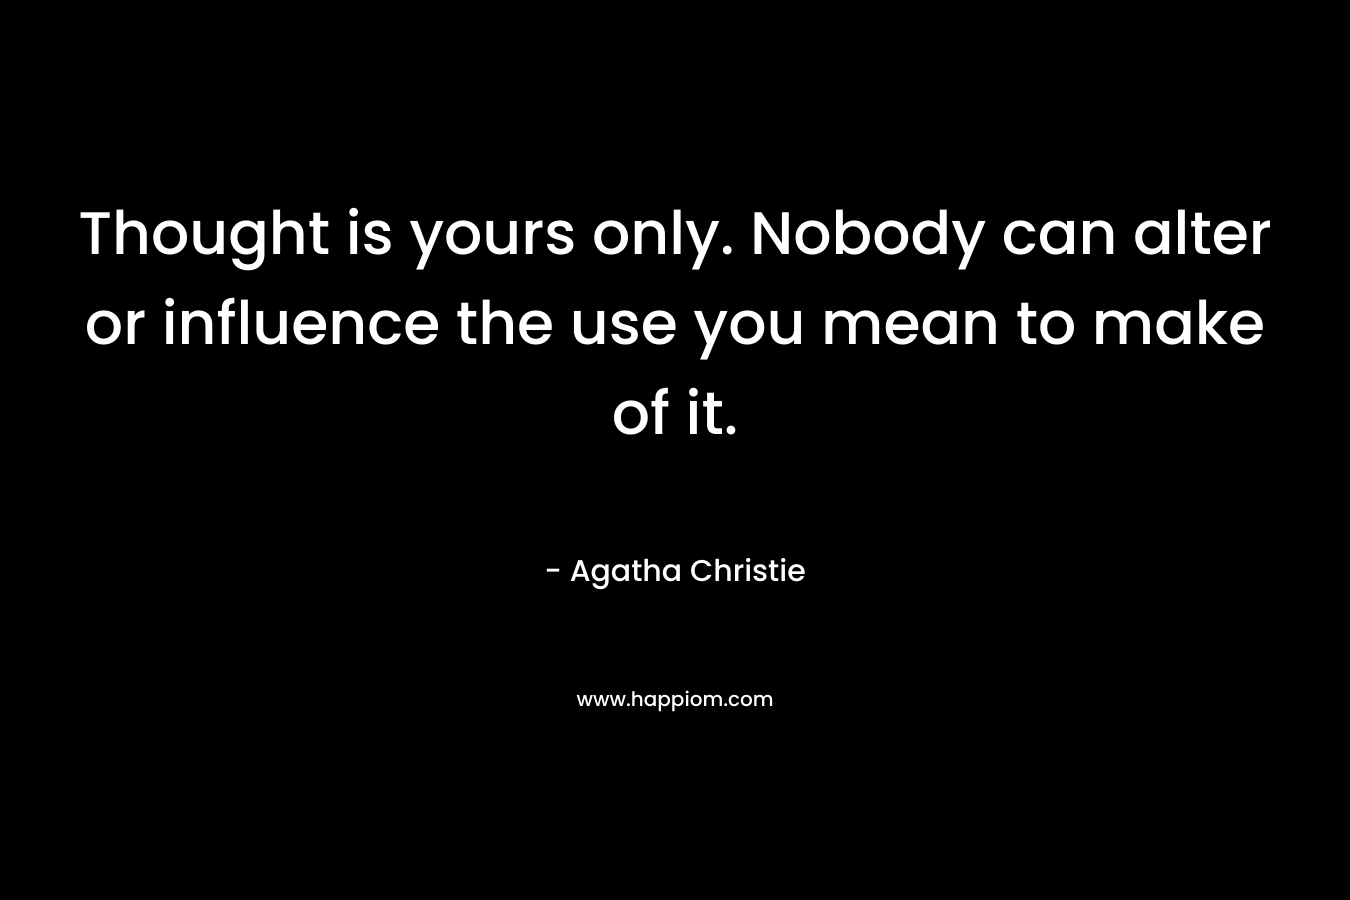 Thought is yours only. Nobody can alter or influence the use you mean to make of it.